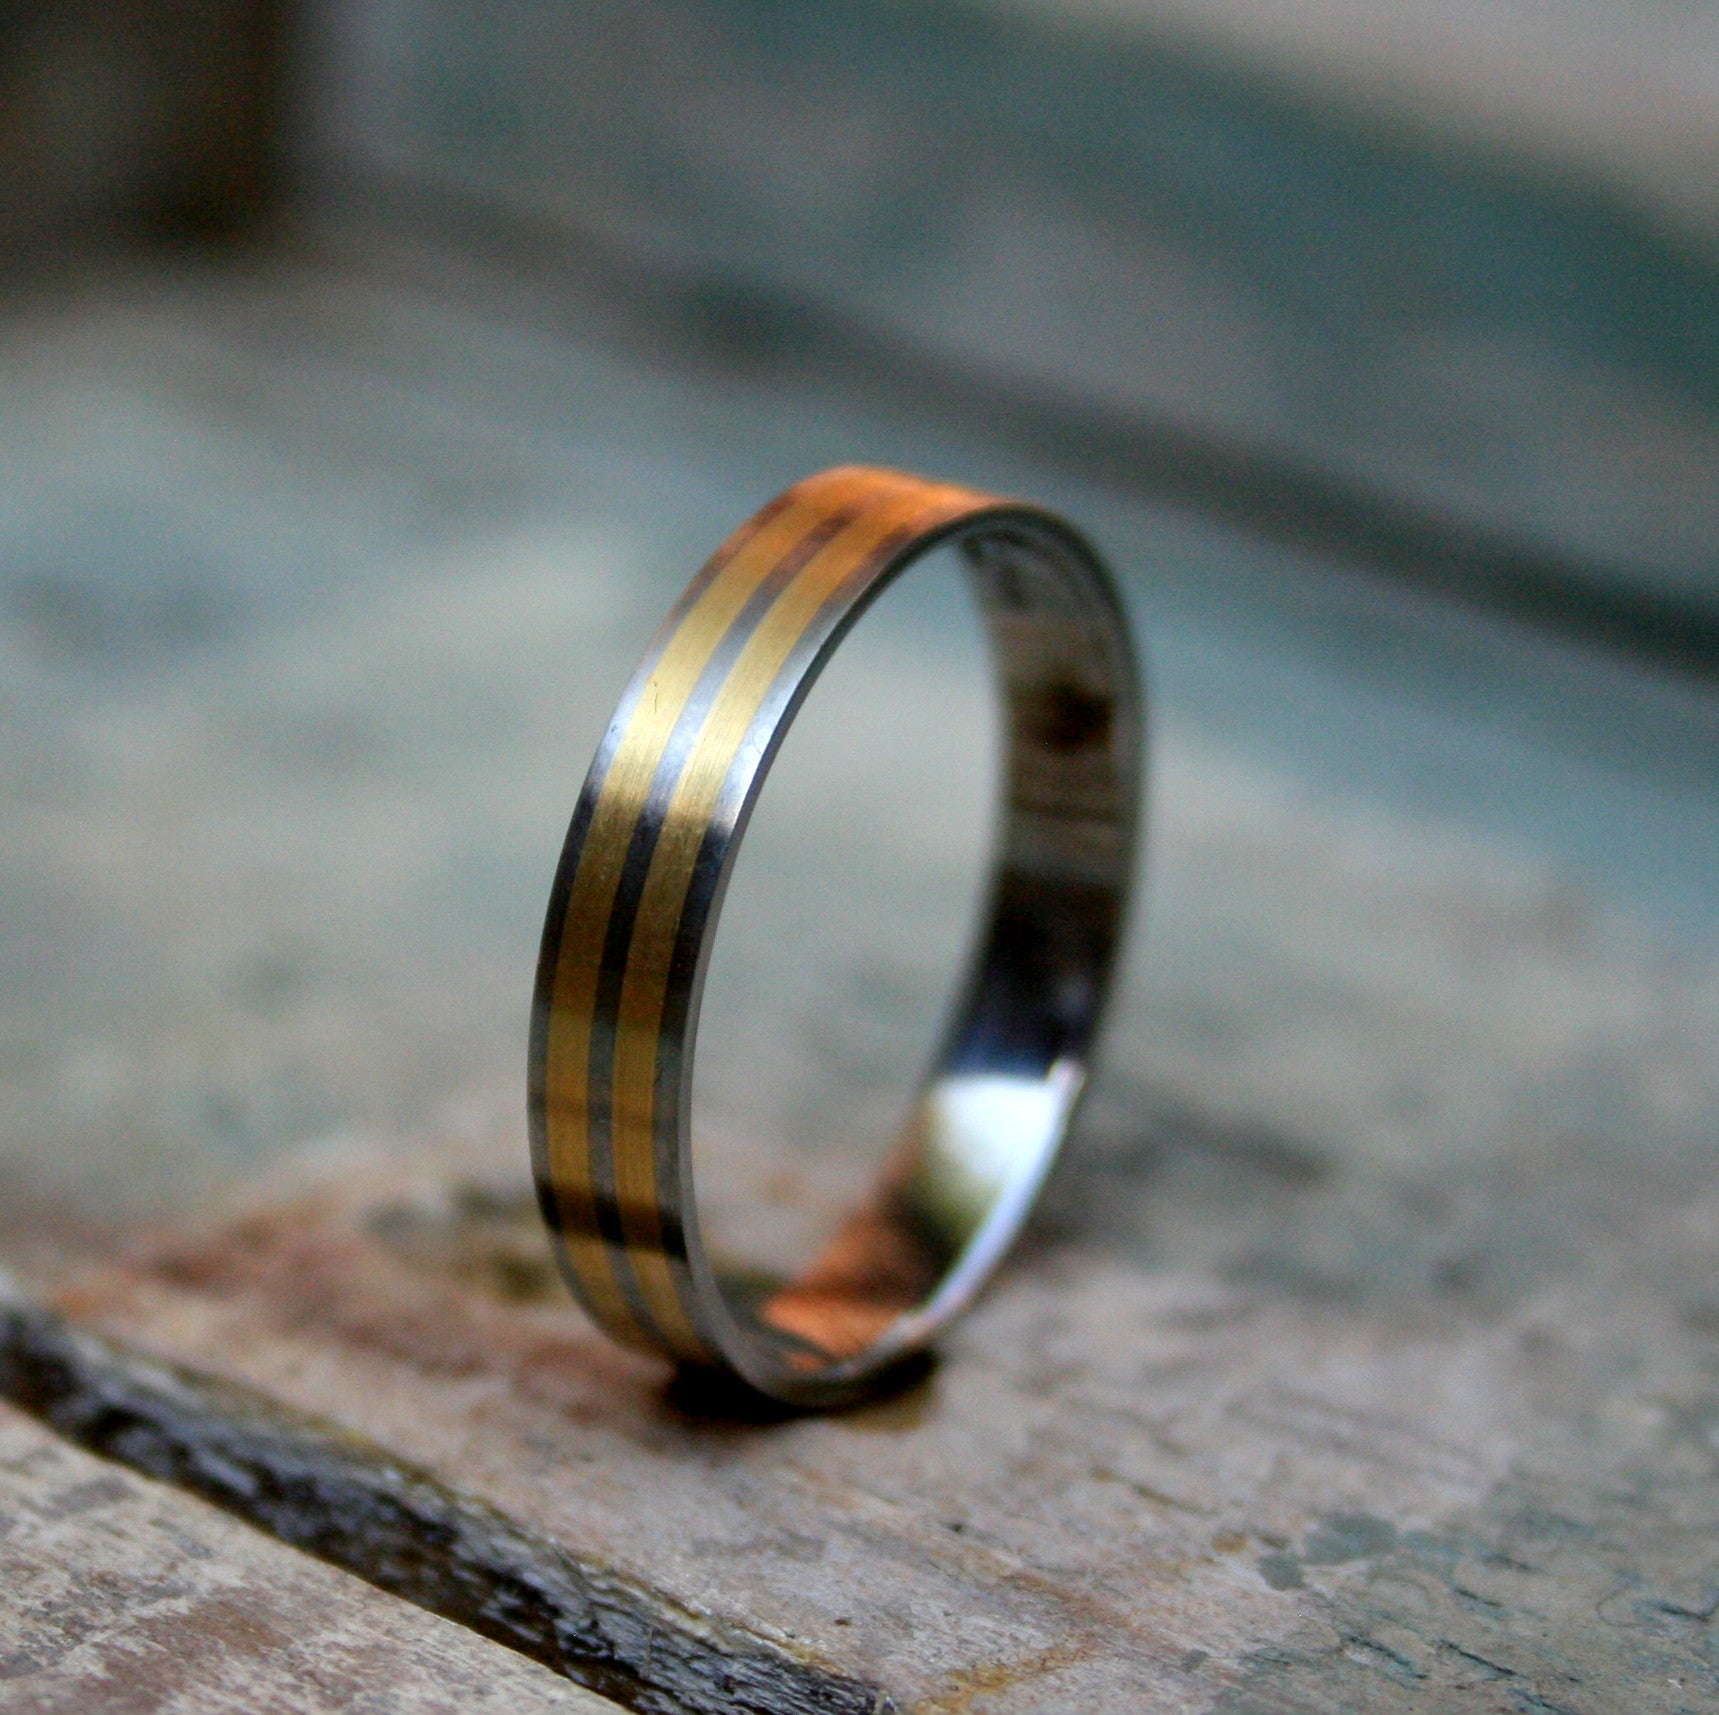 4mm Titanium flat top band with 2 1mm 9ct yellow gold inlays. The ring is made with a matt finish and a comfort fit on the inside.  As a 4mm band this ring design can work well for both the ladies and the gents.